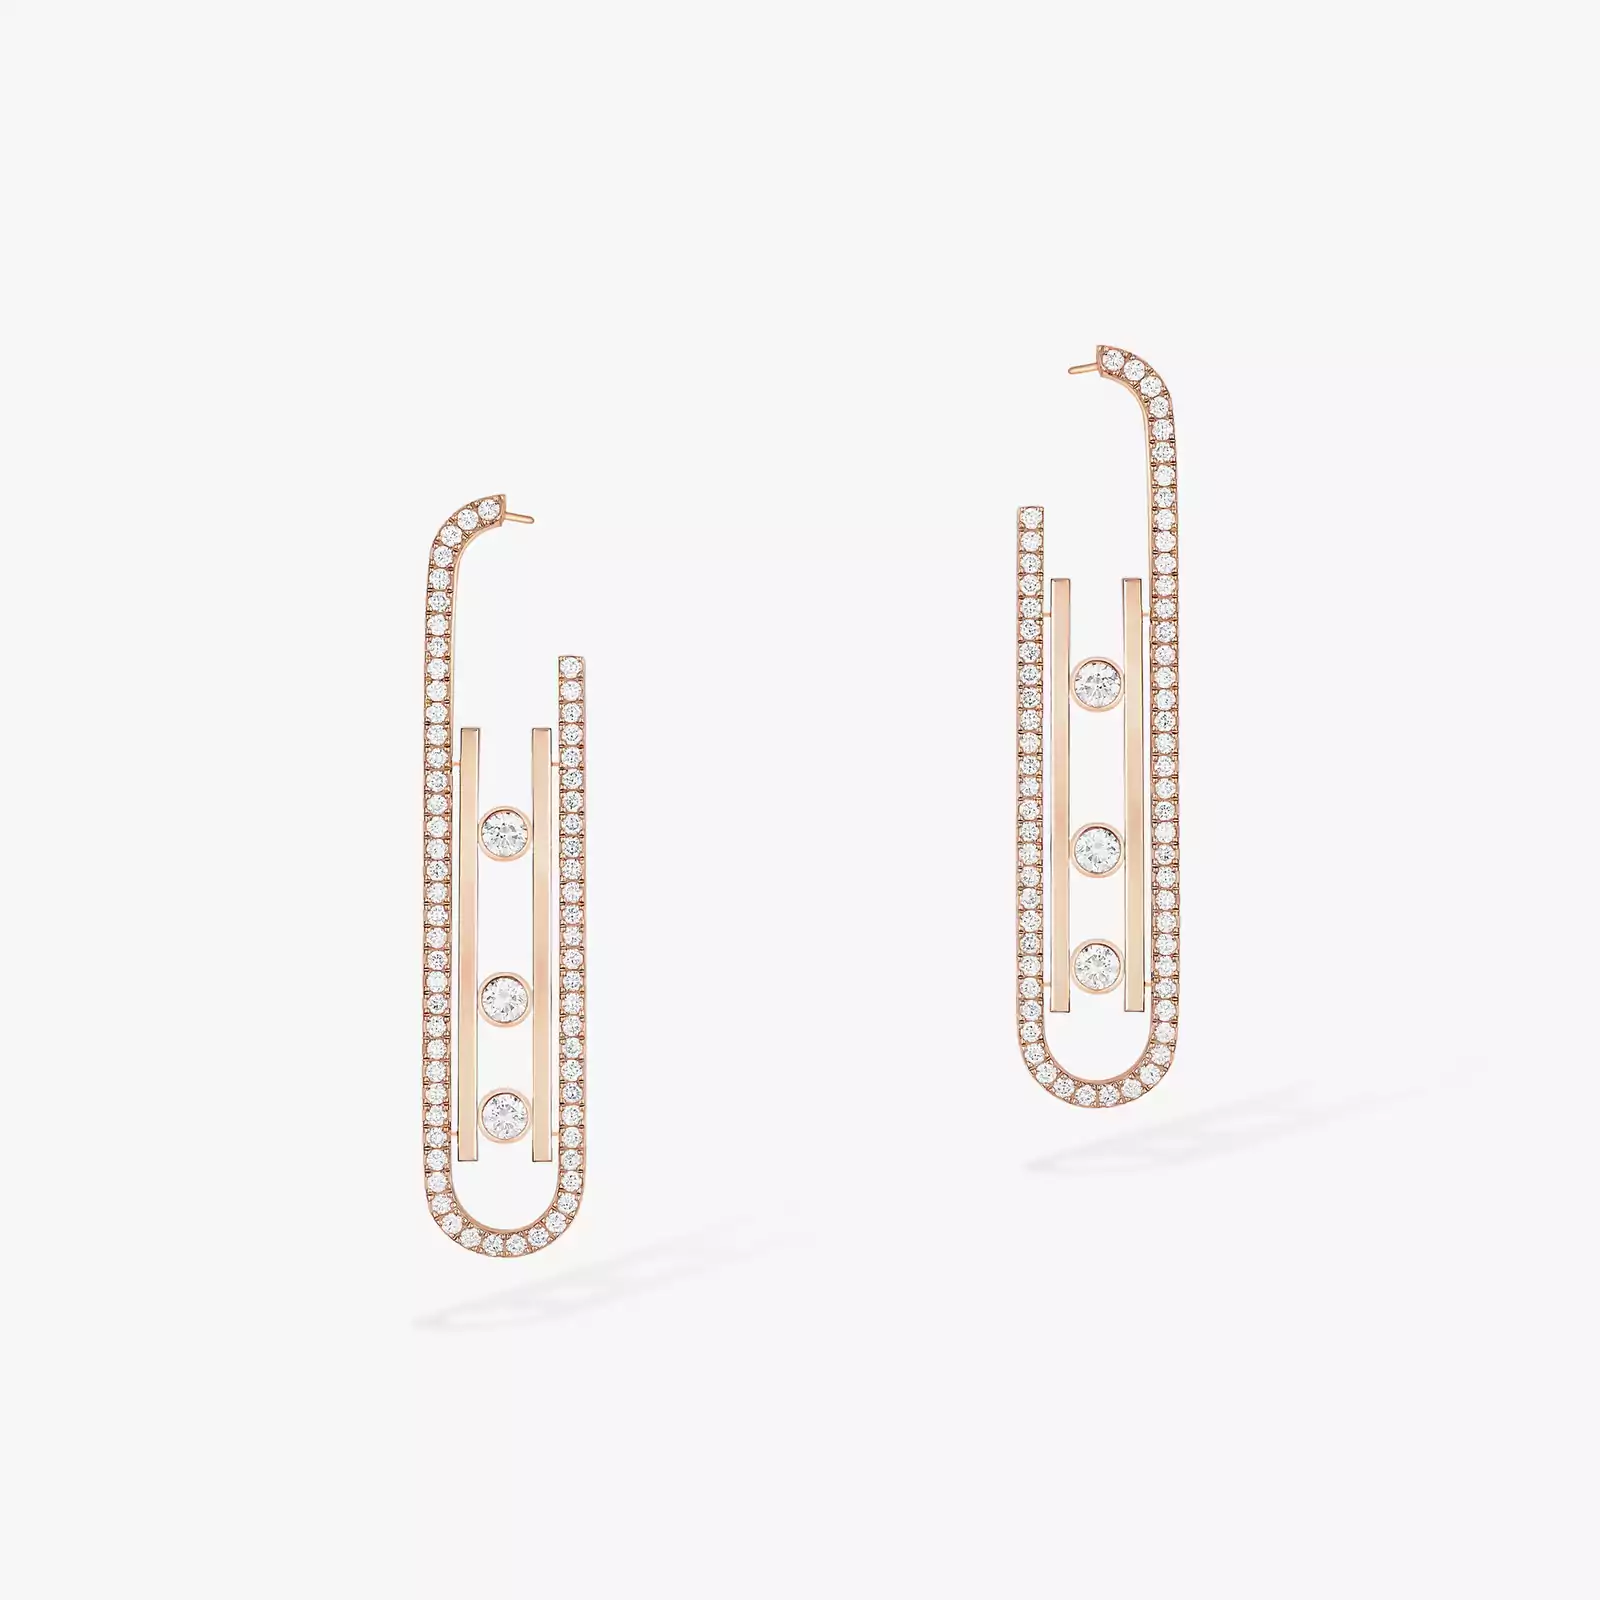 Boucles d'oreilles Move 10th SM Pink Gold For Her Diamond Earrings 10811-PG